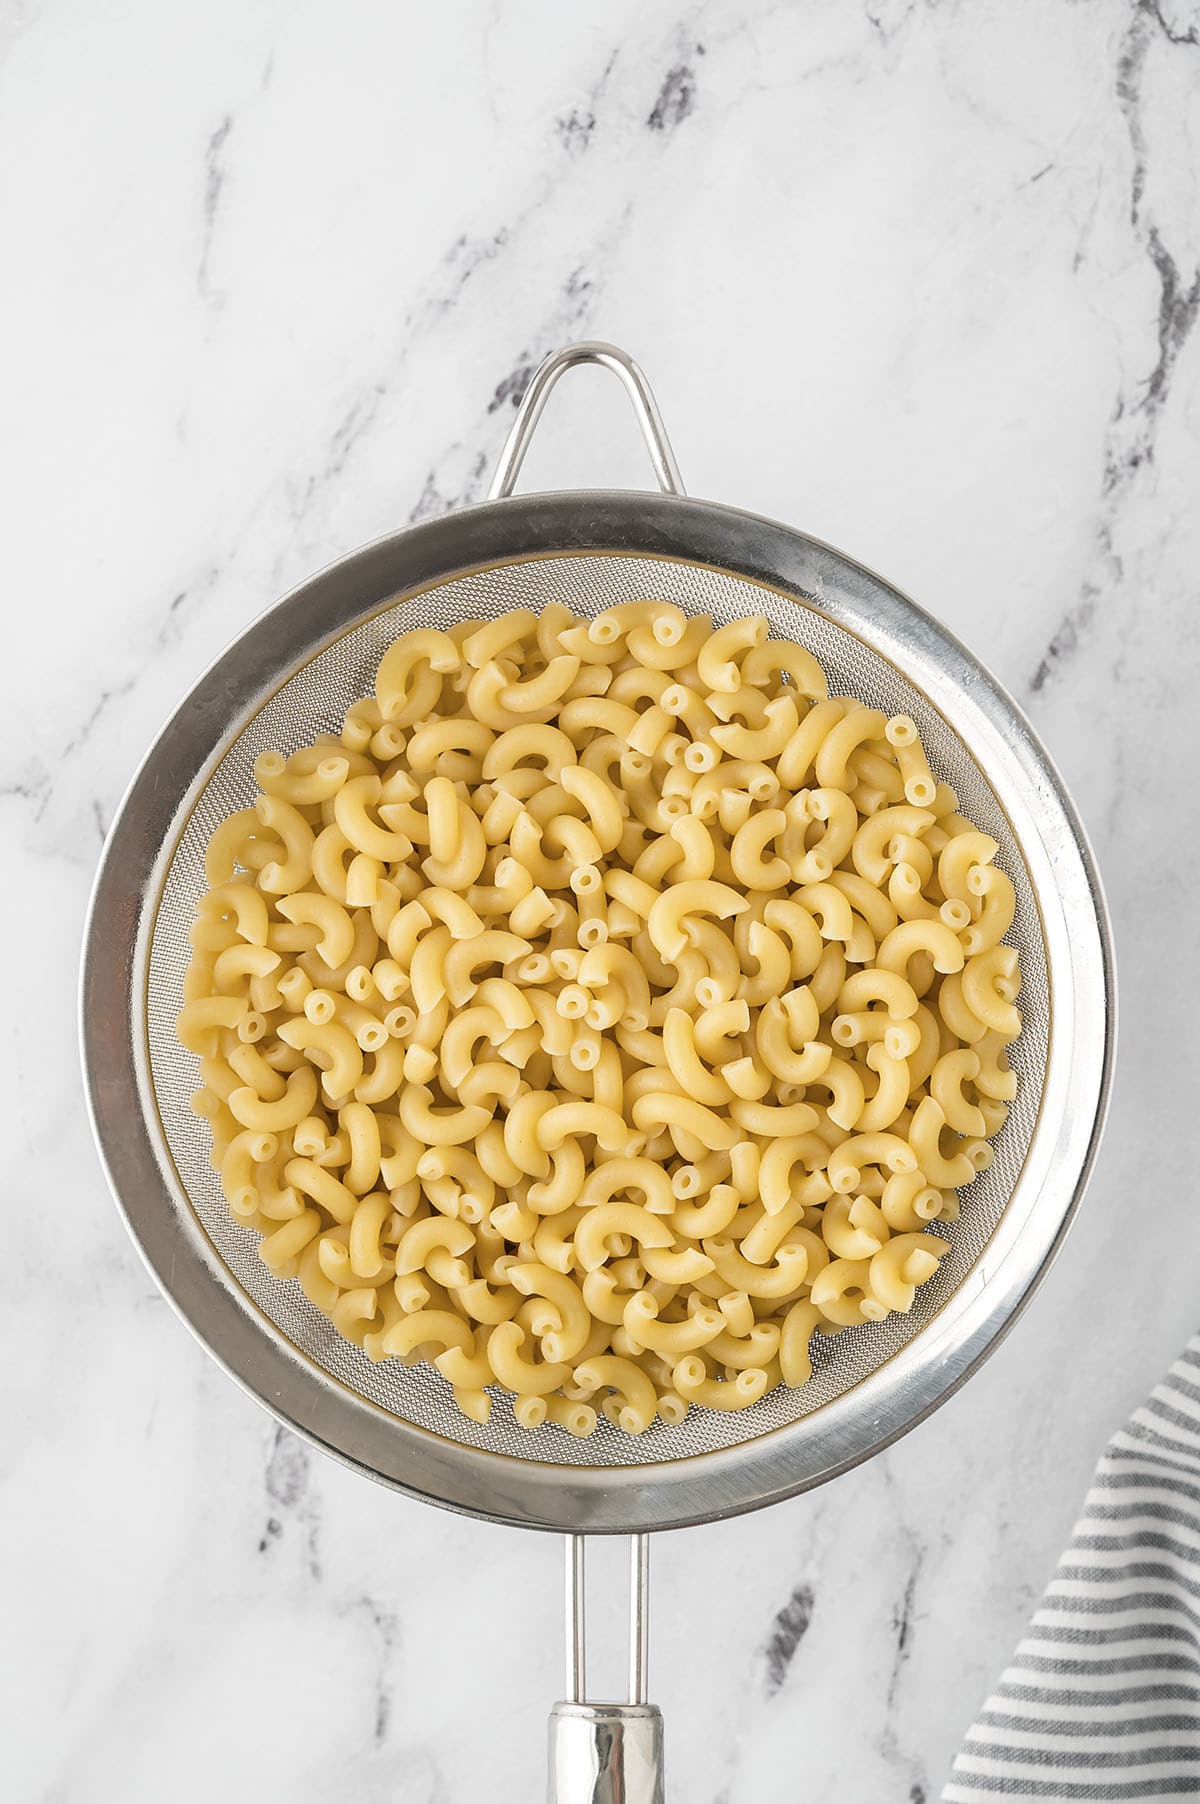 Cooked macaroni in strainer.